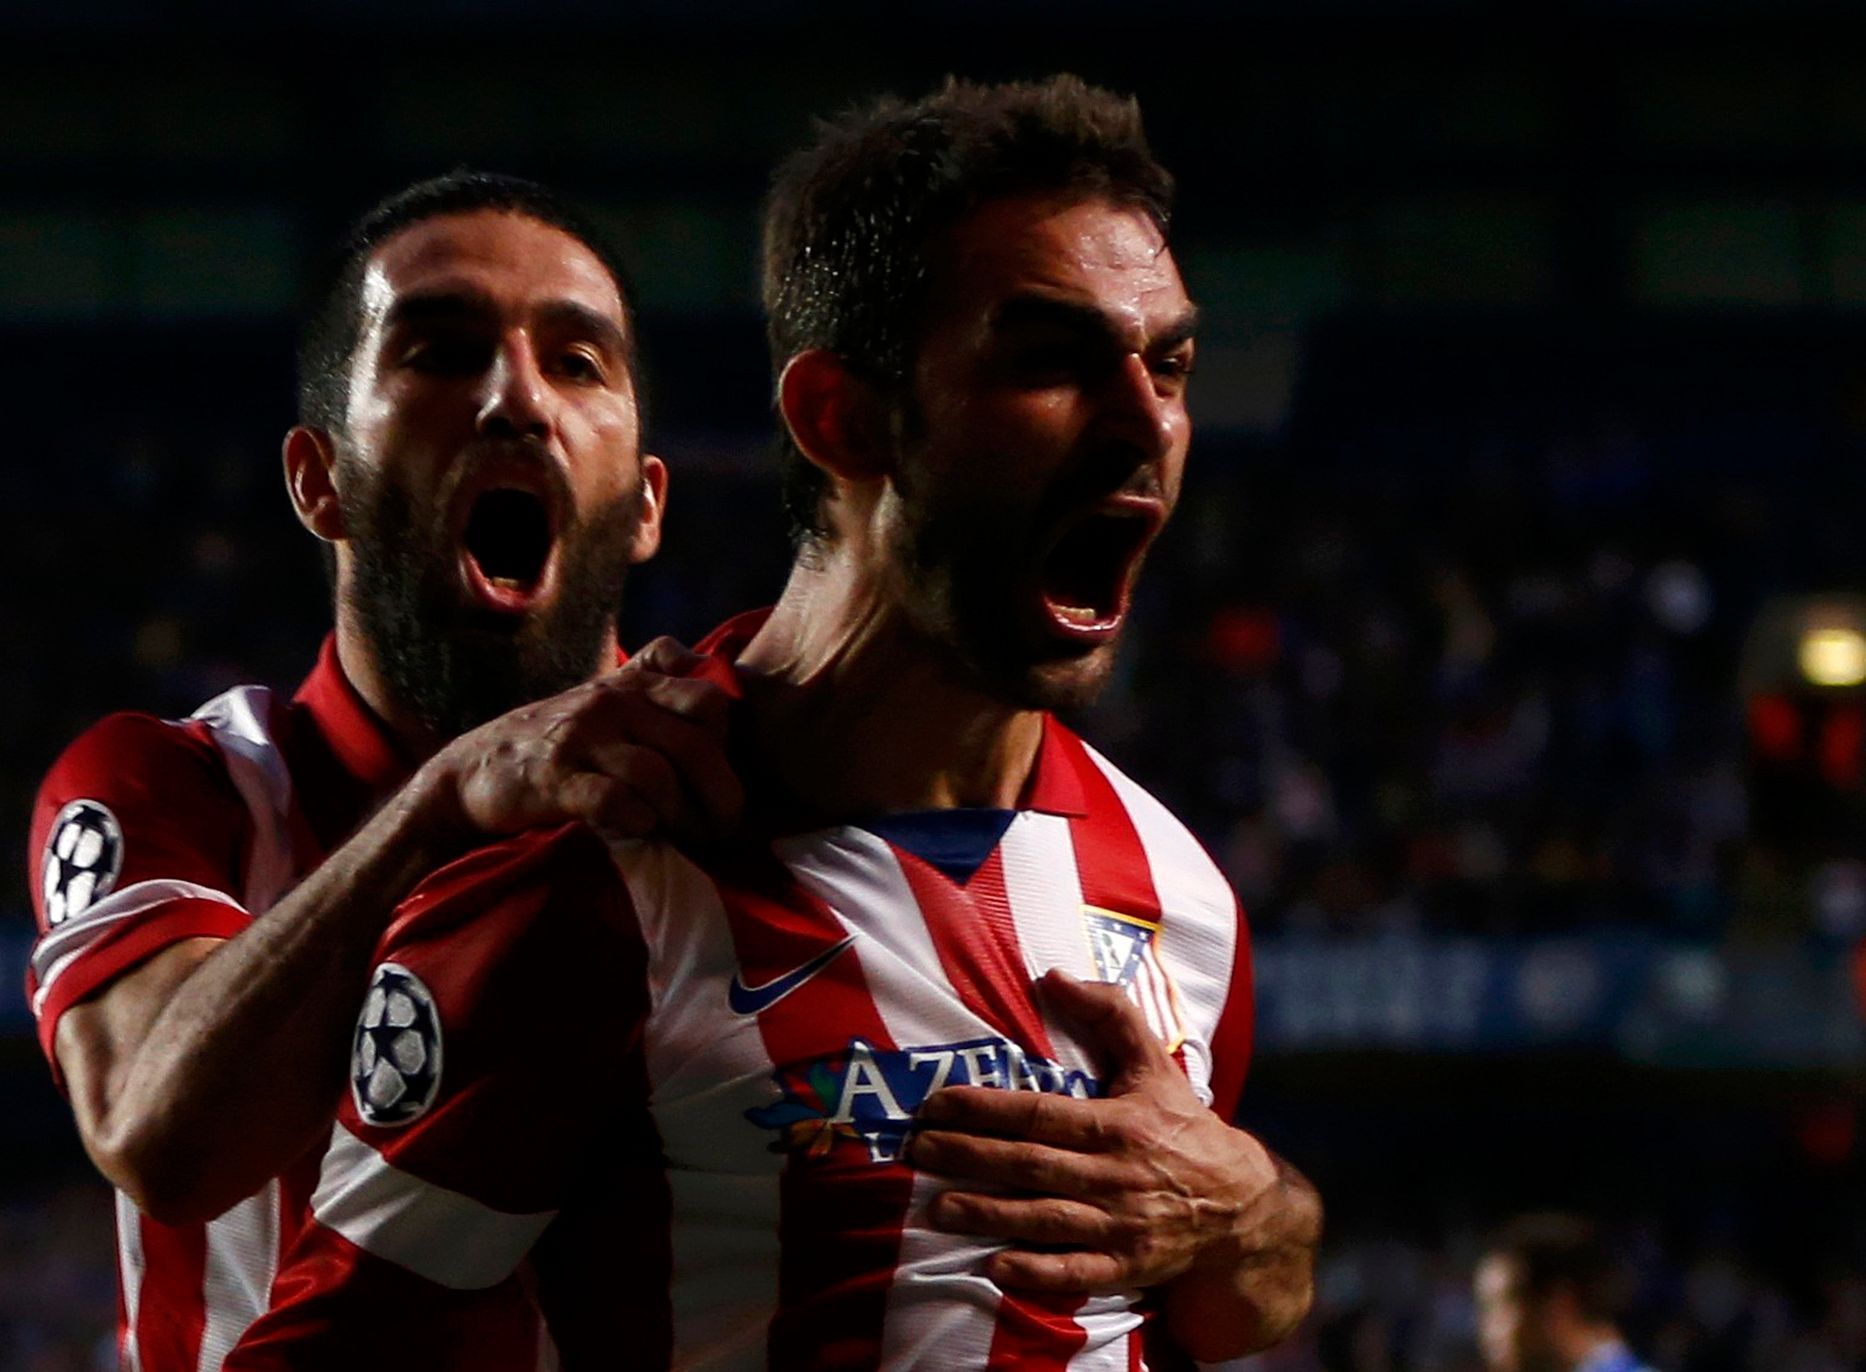 Atletico Madrid's Lopez celebrates with team mate Turan after scoring the first goal for the team during their Champions League semi-final second leg soccer match against Chelsea at Stamford Bridge St